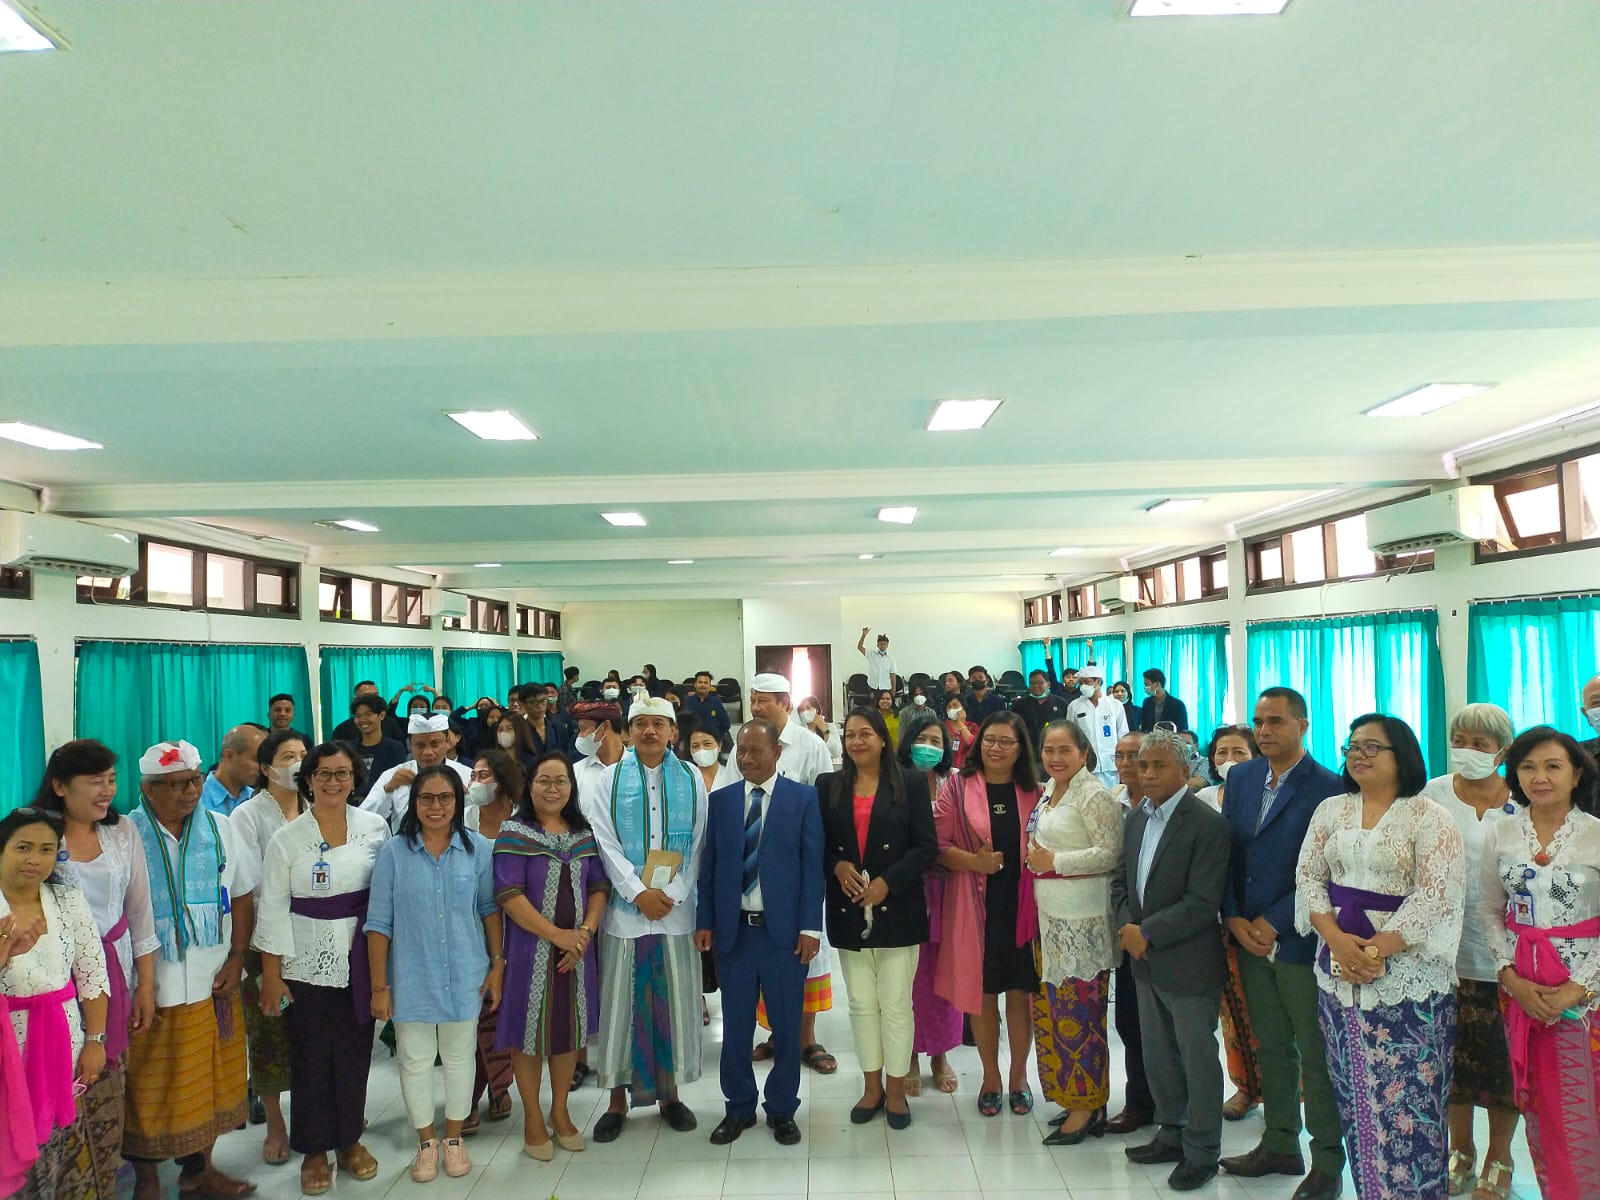 General Lecture of the Rector and Head of the Department of Animal Science, Faculty of Agriculture, Univercidade Nacional Timor Lorosa'e at the Faculty of Animal Husbandry, Udayana University